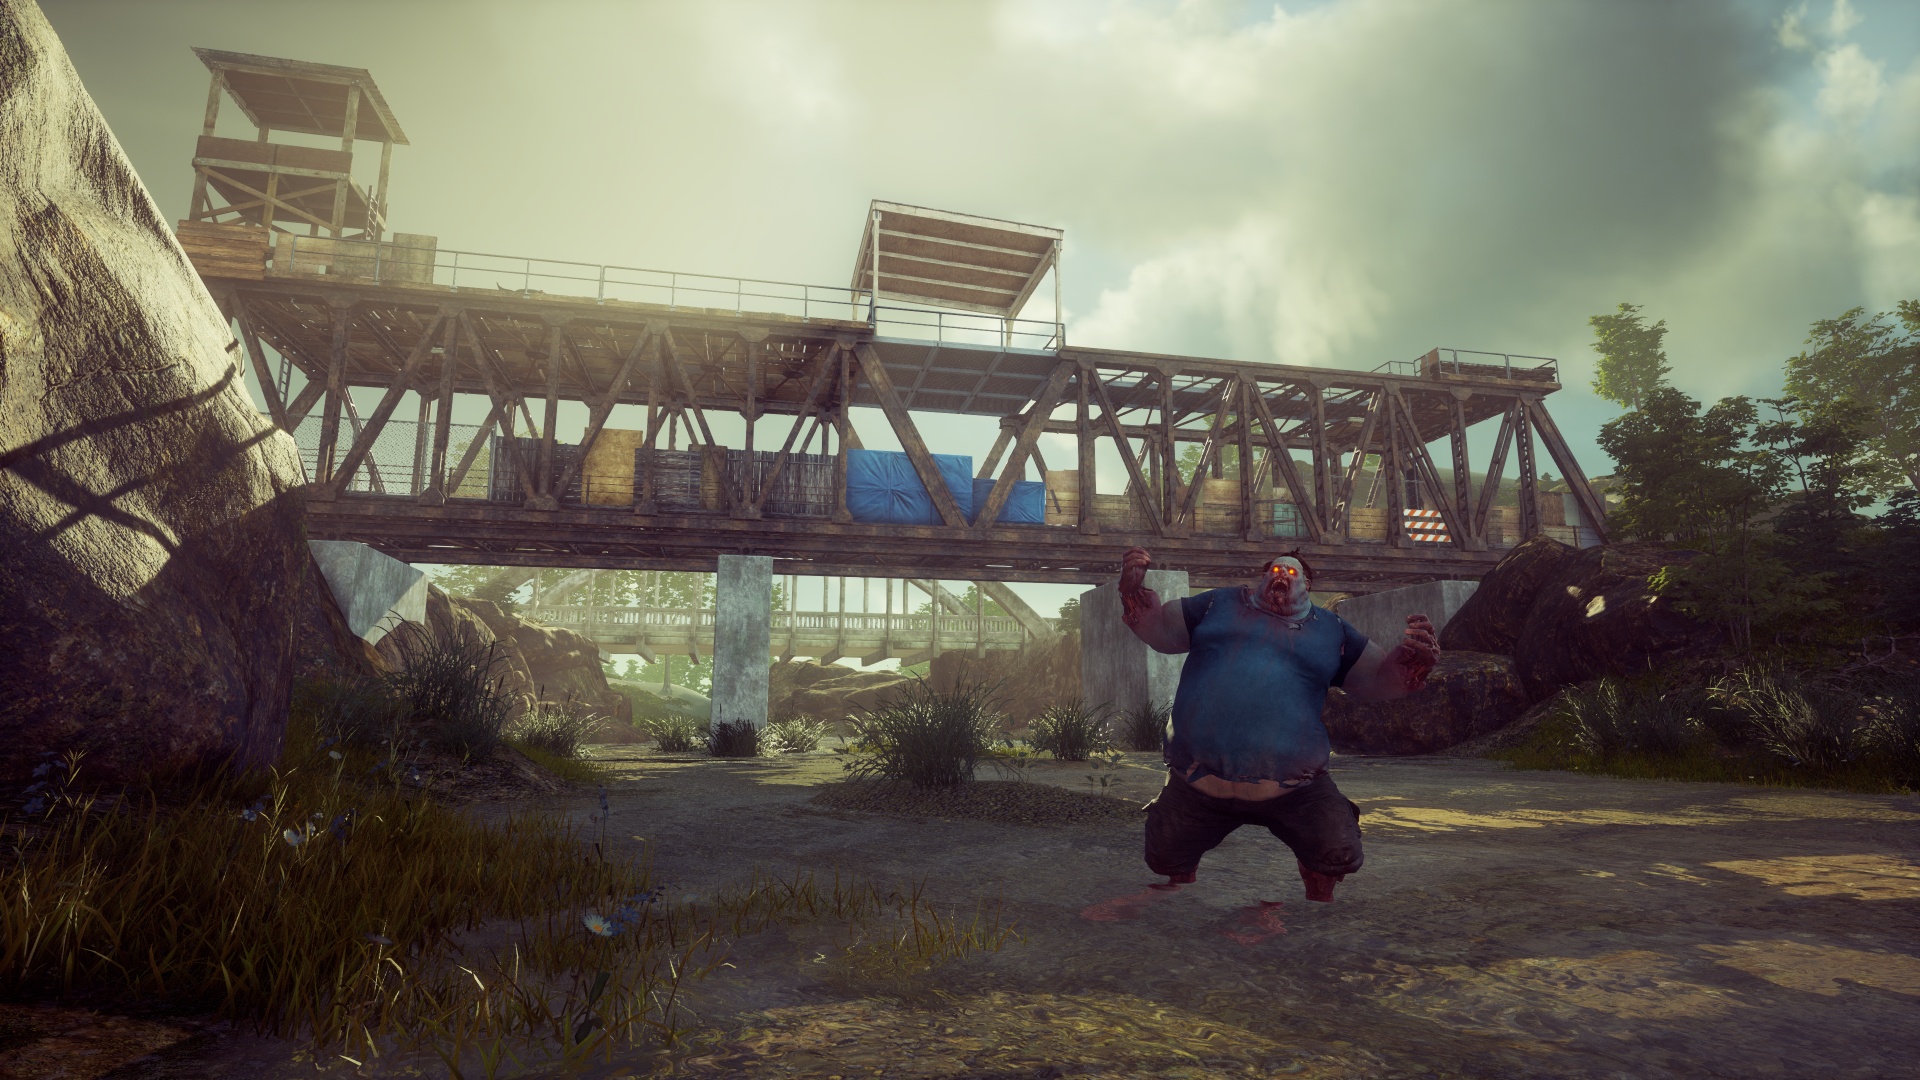 State of Decay 2: Juggernaut Edition brings a bunch of new content, and  it's all free if you already have the game